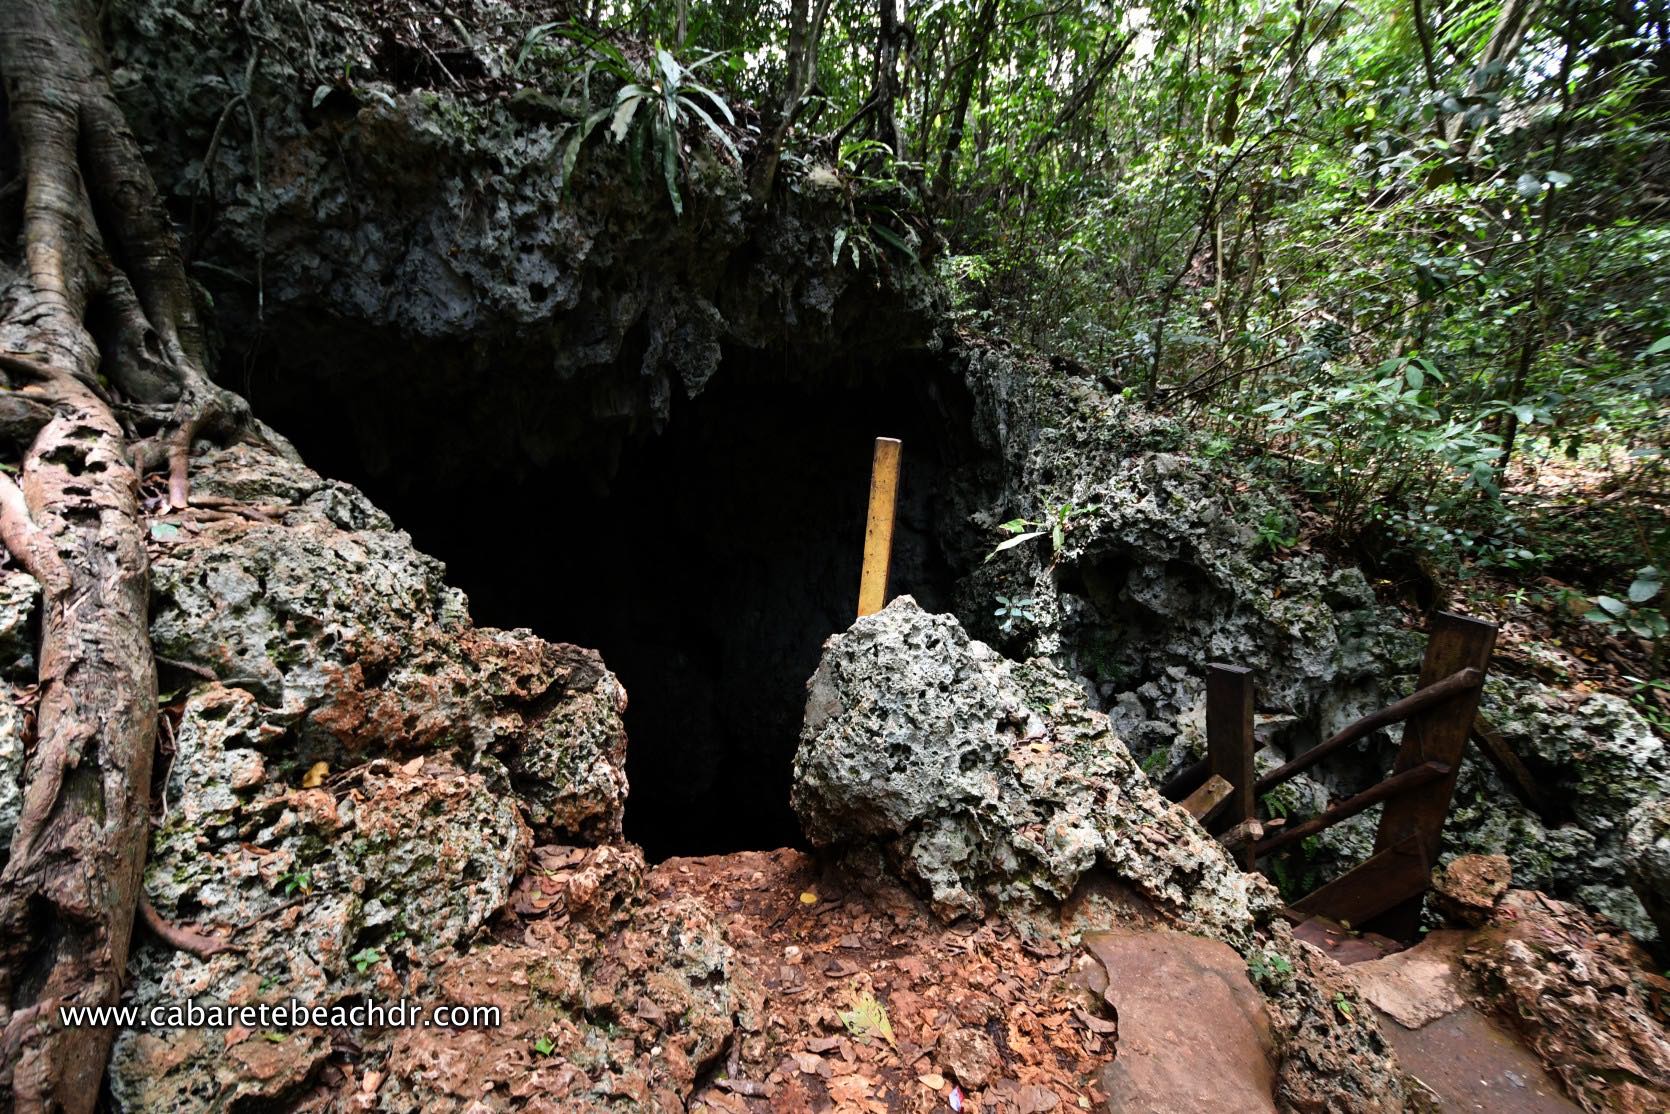 Entrance to the frog cave